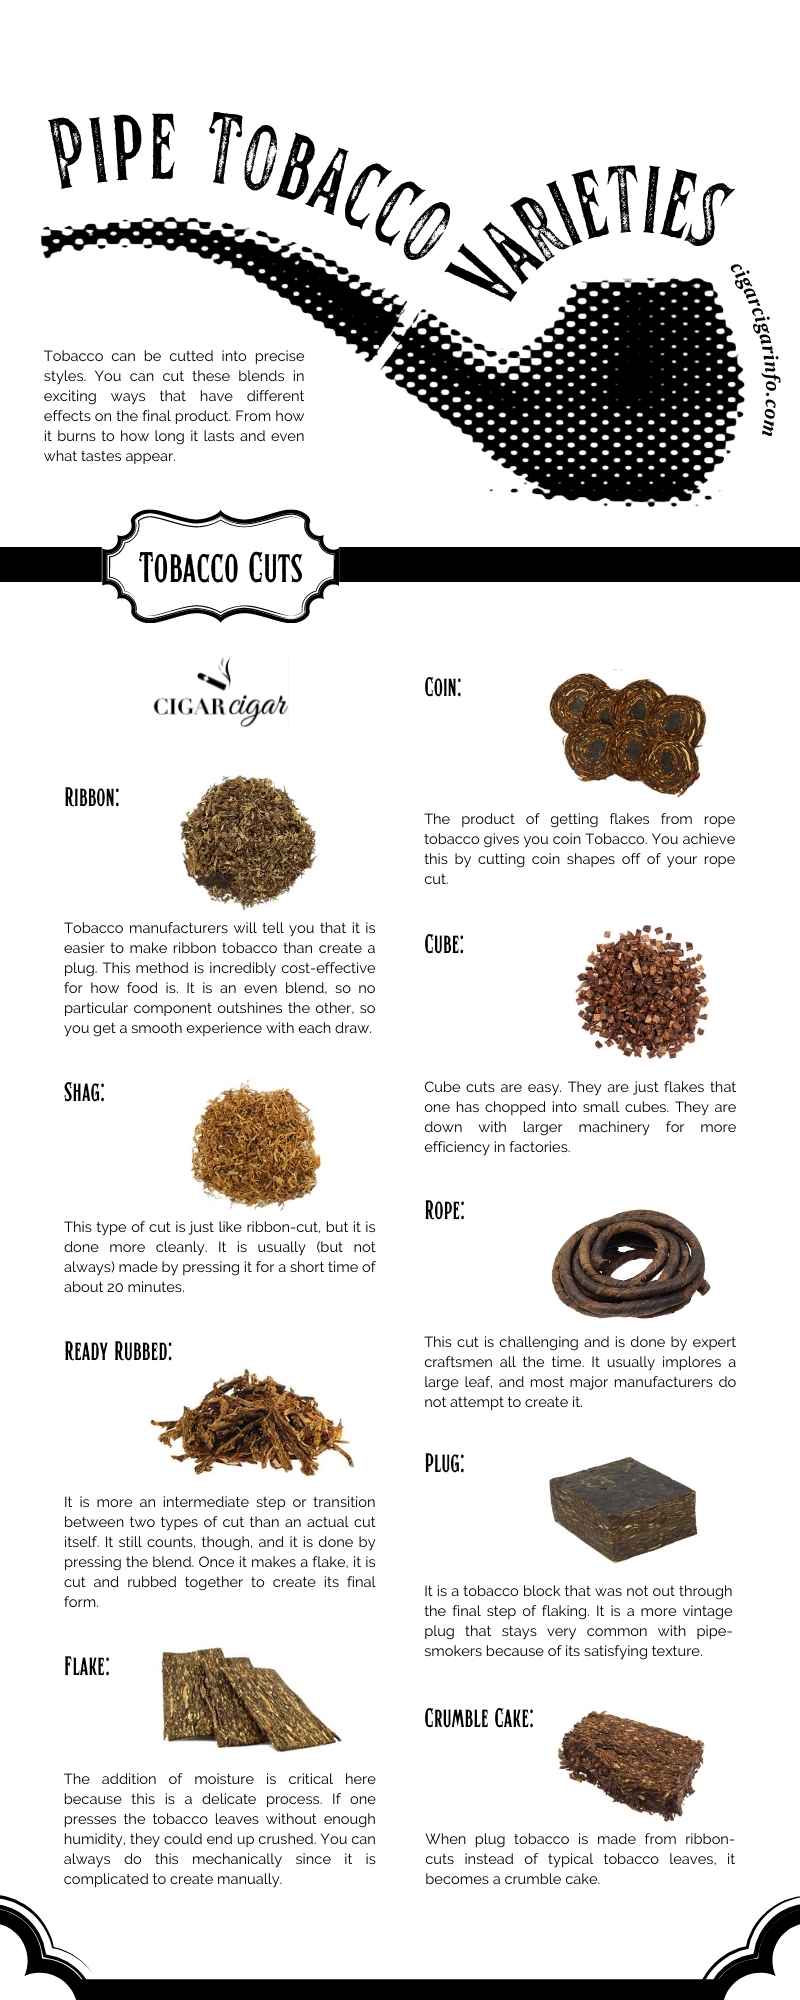 A Guide To Pipe Tobacco Varieties - CigarCigar